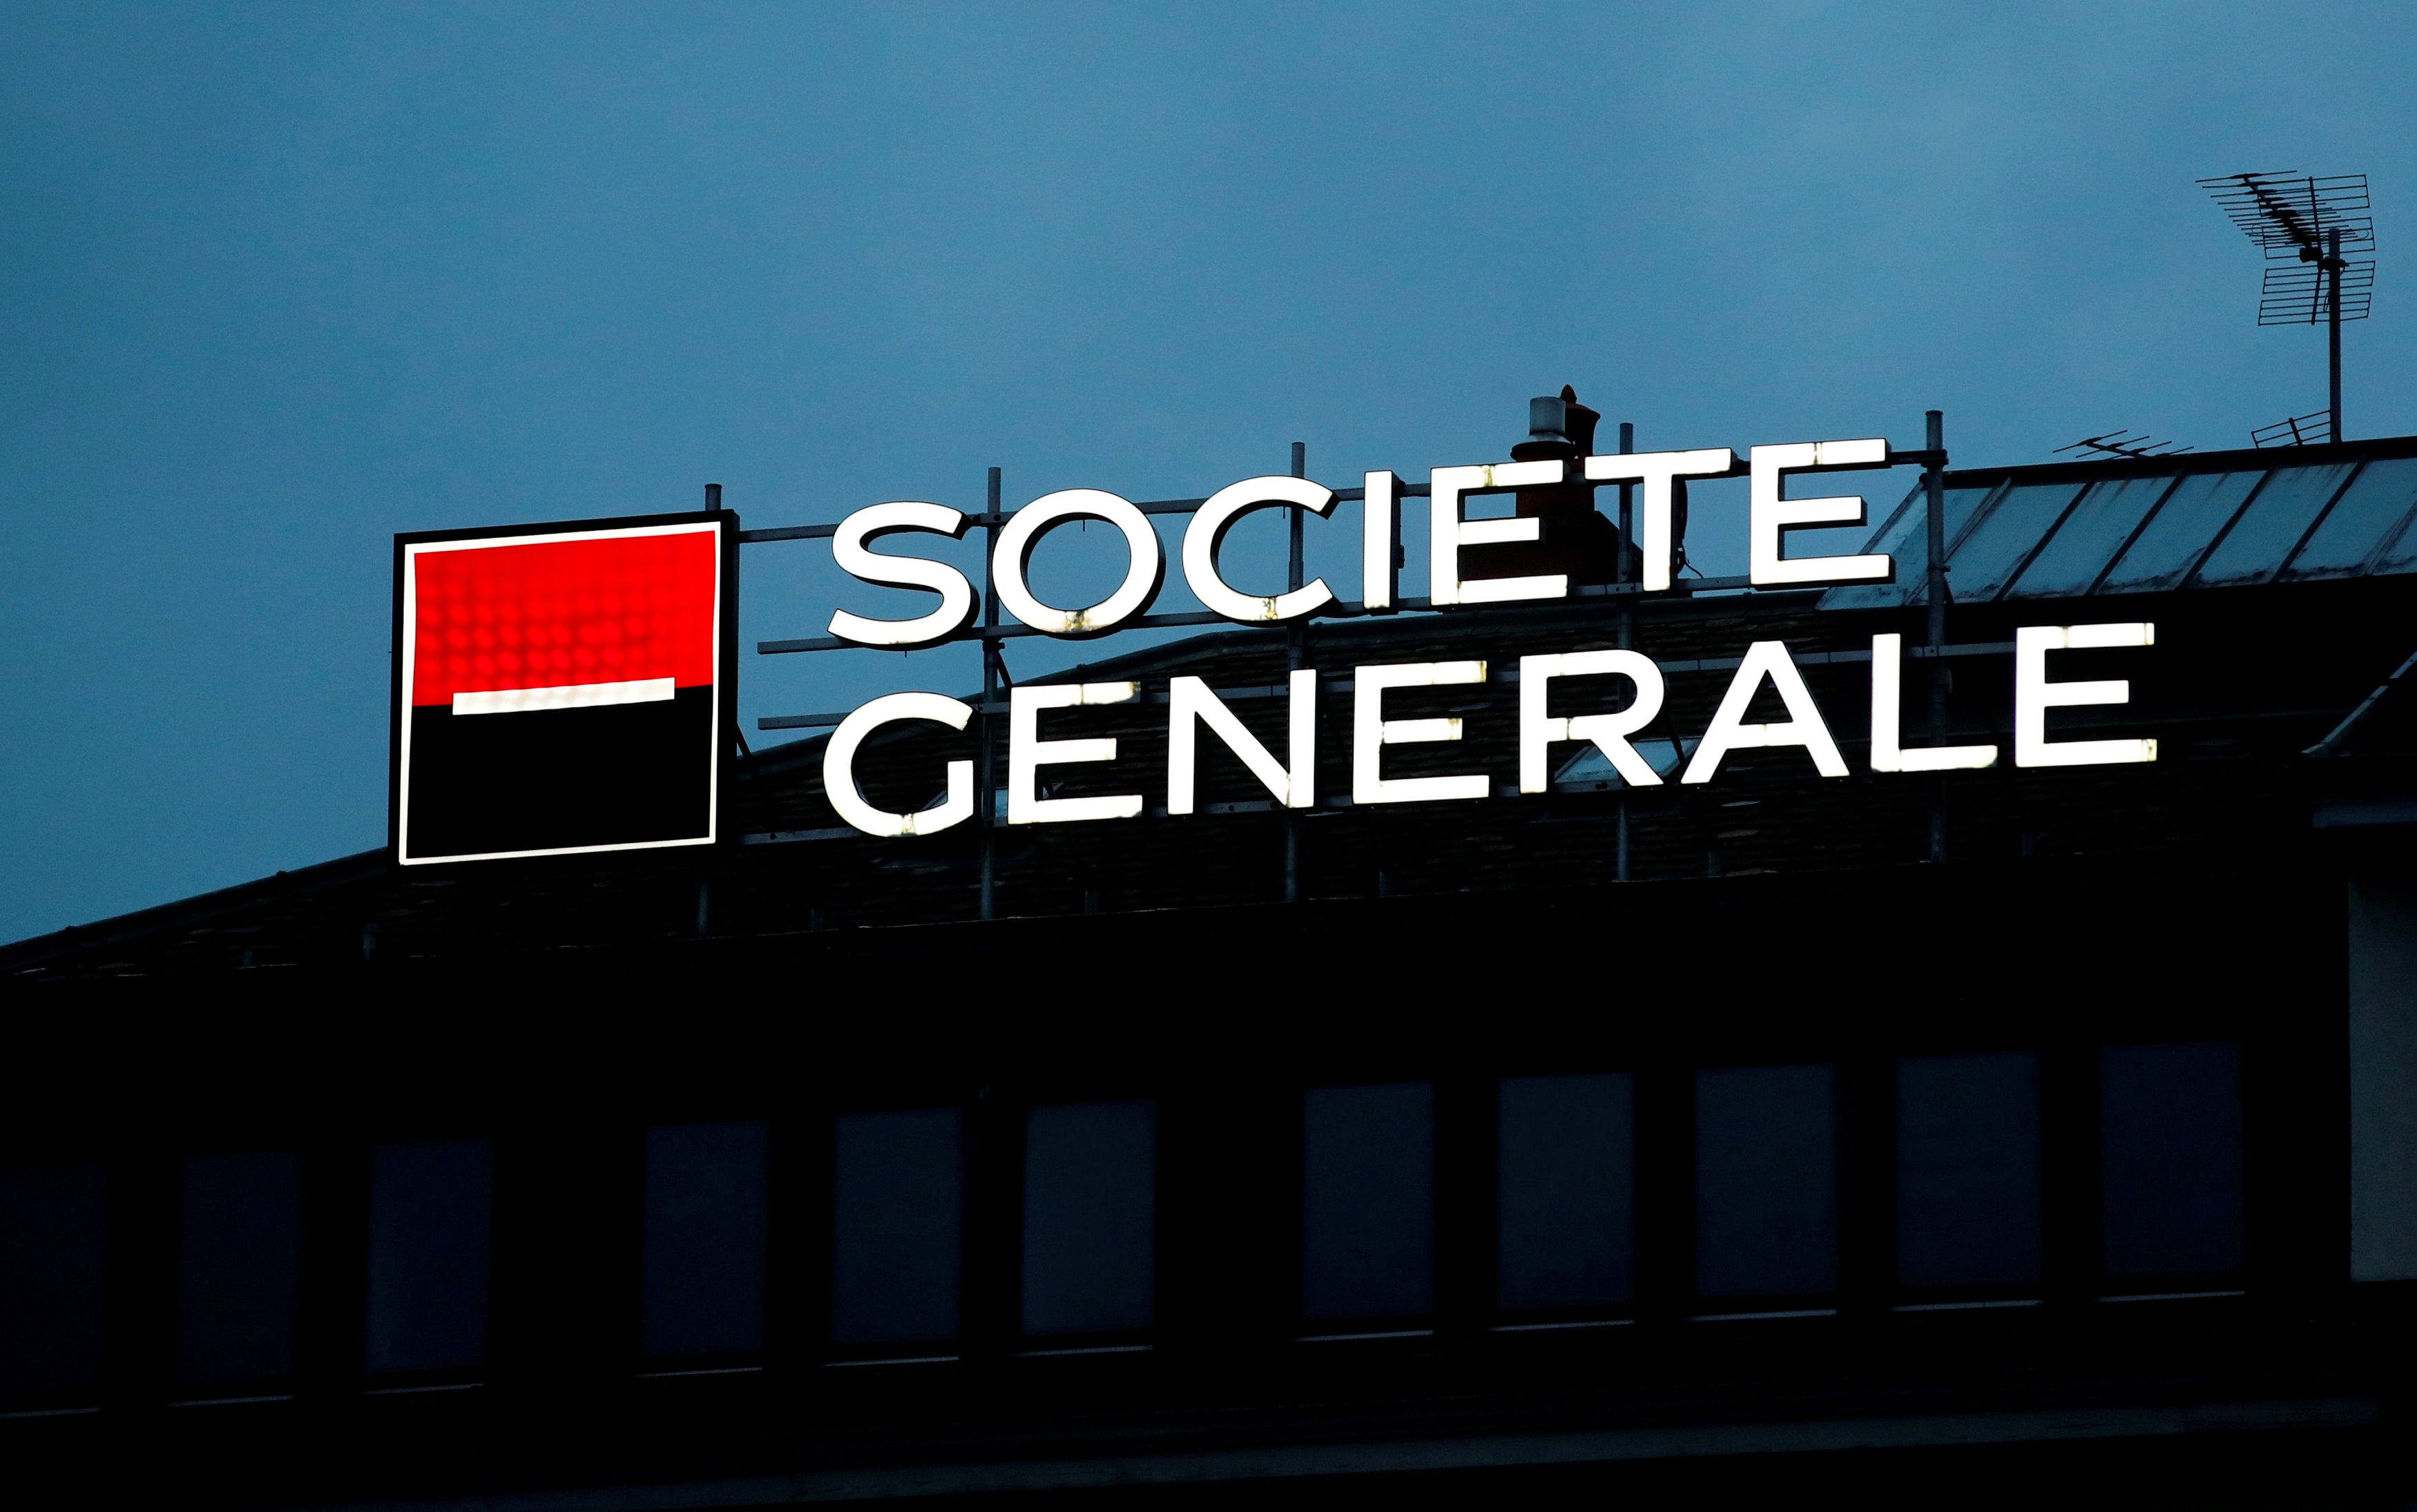 A logo of French bank Societe Generale is pictured on a building in Geneva, Switzerland. Photo: Reuters